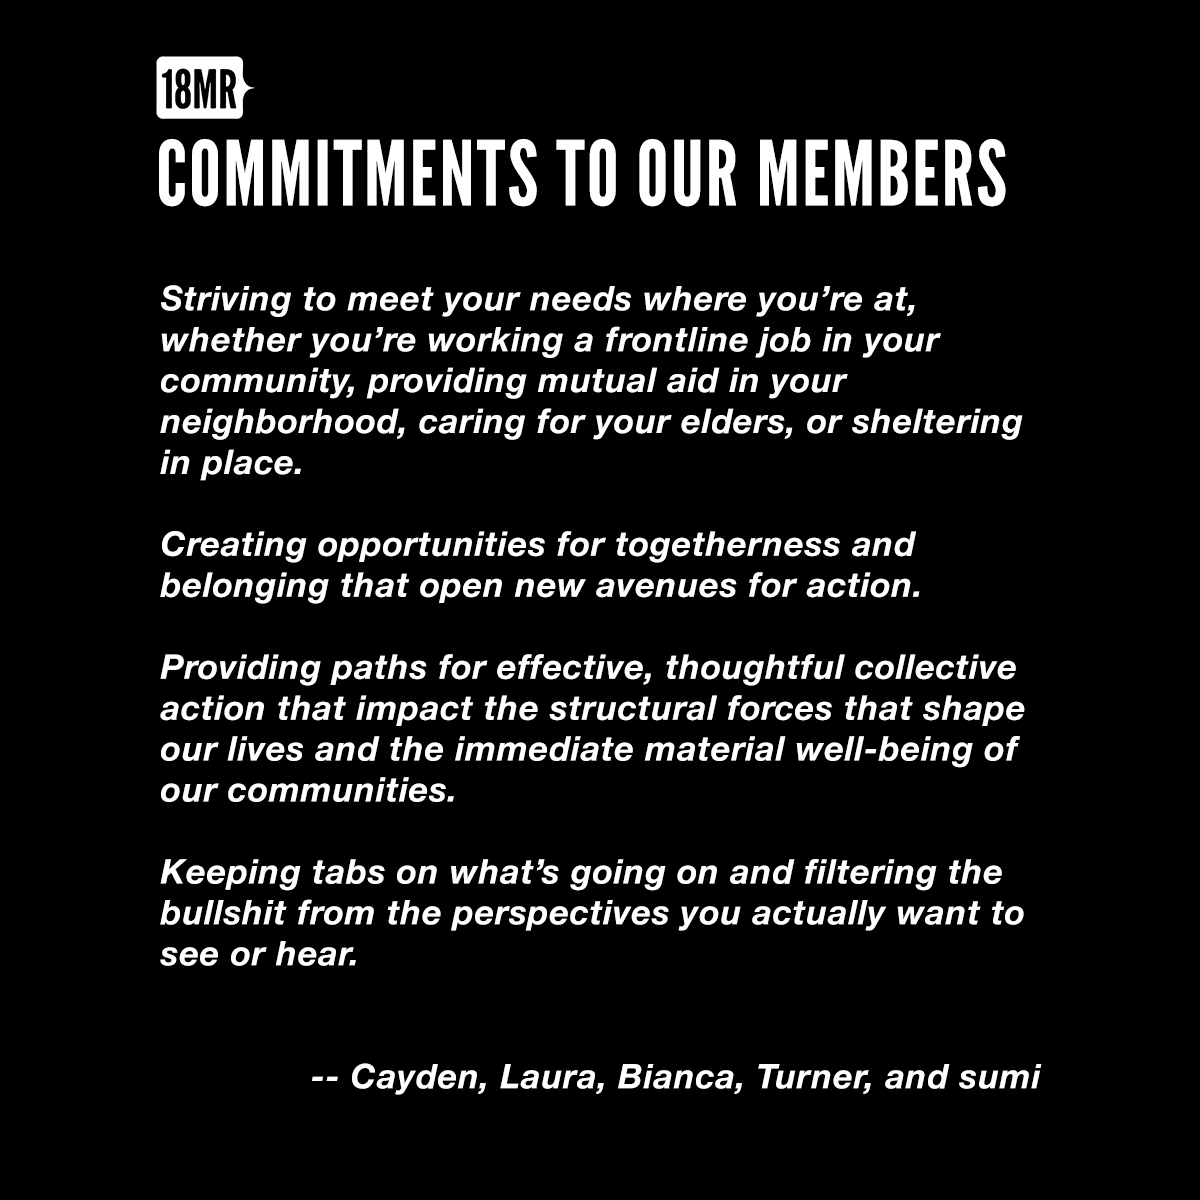 Our Commitments to Our Members - Striving to meet your needs where you’re at, whether you’re working a frontline job in your community, providing mutual aid in your neighborhood, caring for your elders, or sheltering in place.- Creating opportunities for togetherness and belonging that open new avenues for action. -Providing paths for effective, thoughtful collective action that impact the structural forces that shape our lives and the immediate material well-being of our communities. - Keeping tabs on what’s going on and filtering the bullshit from the perspectives you actually want to see or hear.